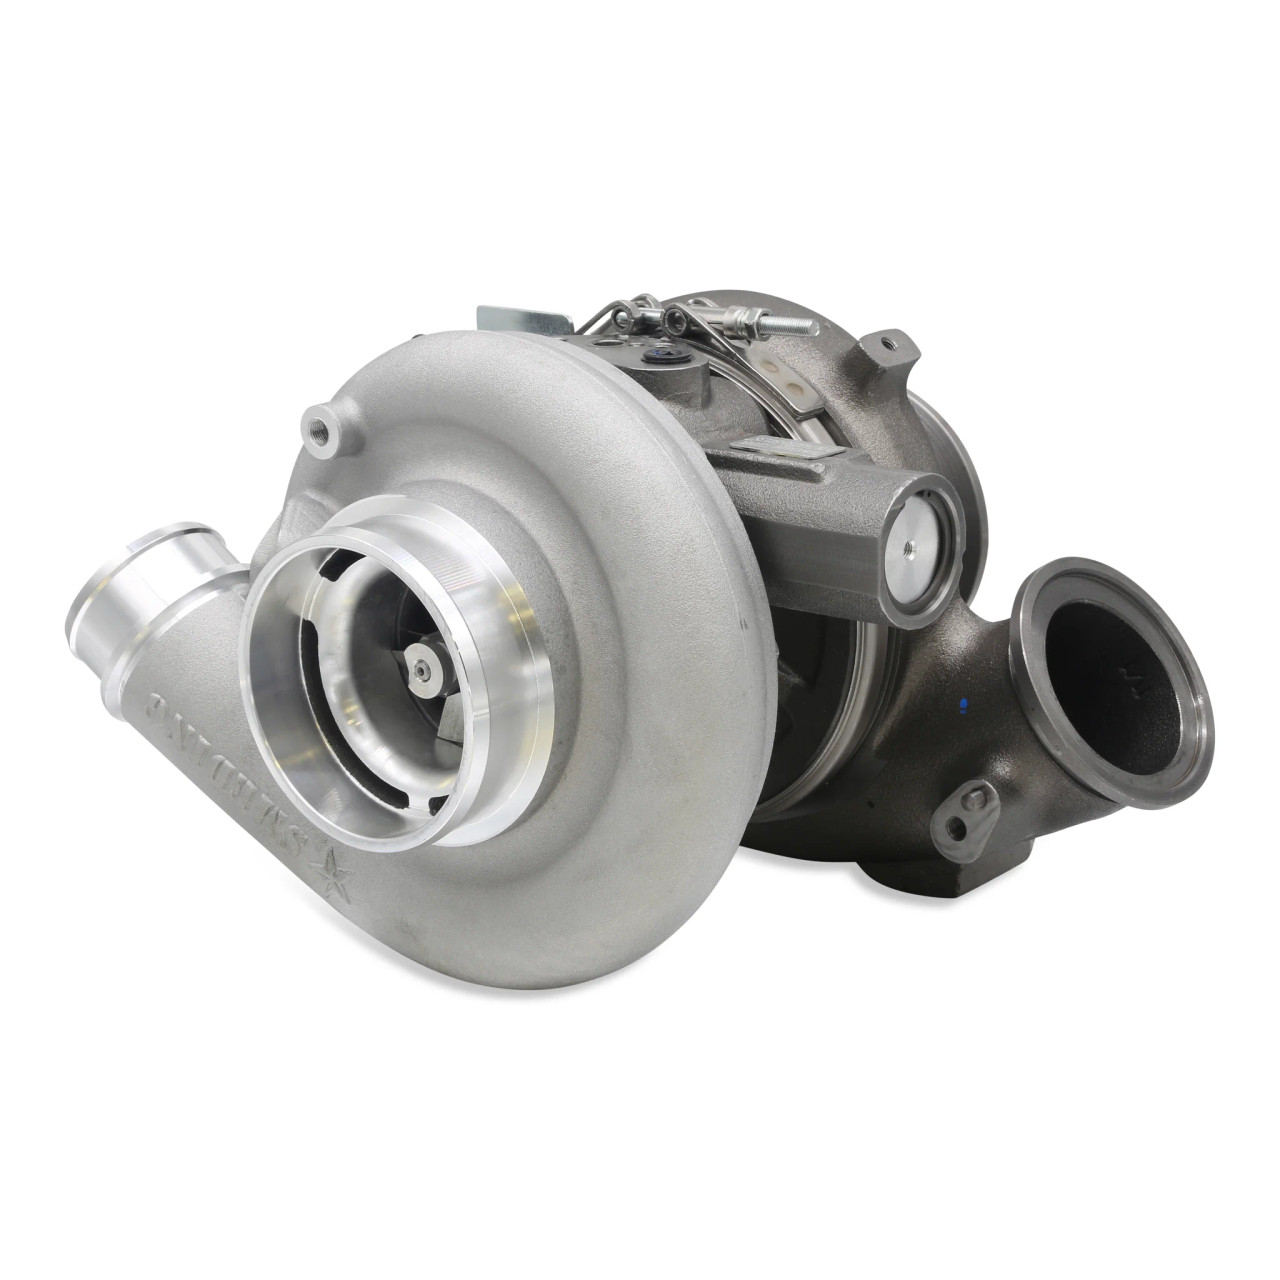 Smeding Stage 2 VGT Turbocharger for 2003 to 2007 Ford 6.0L Powerstroke (SD6.0S2VGT) This View